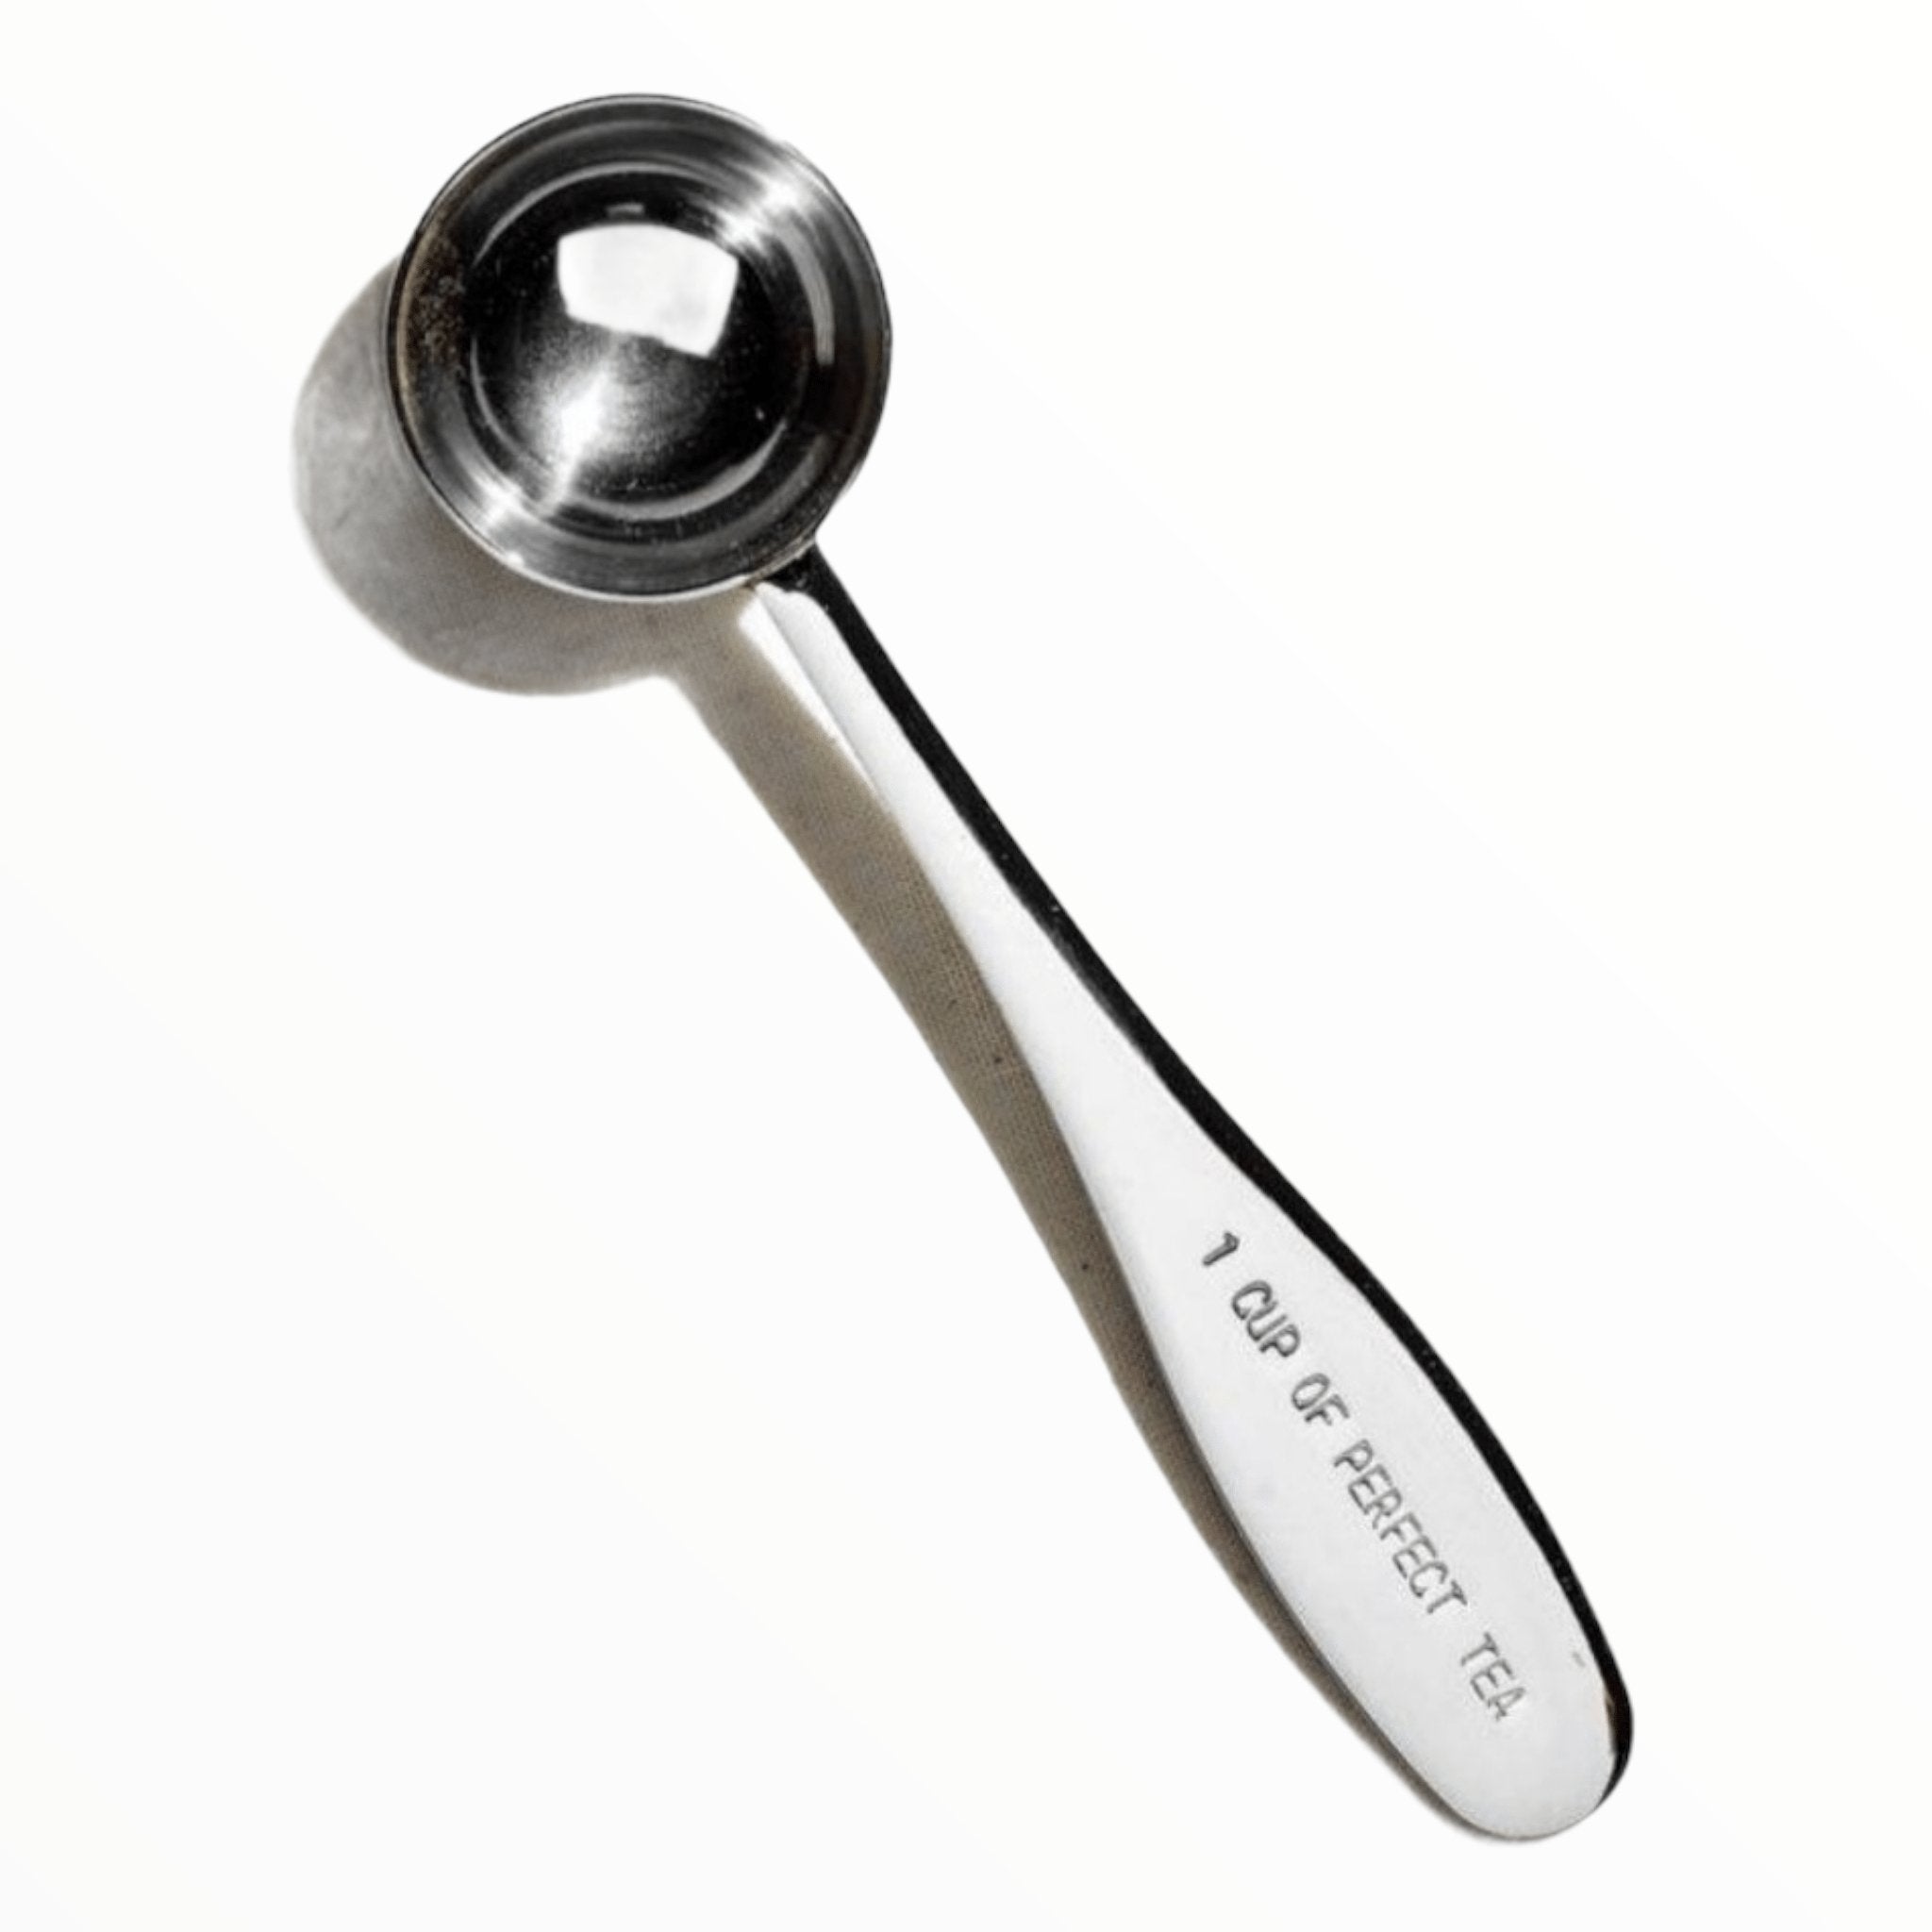 One Cup of Perfect Tea Measuring Spoon: The Tea Table